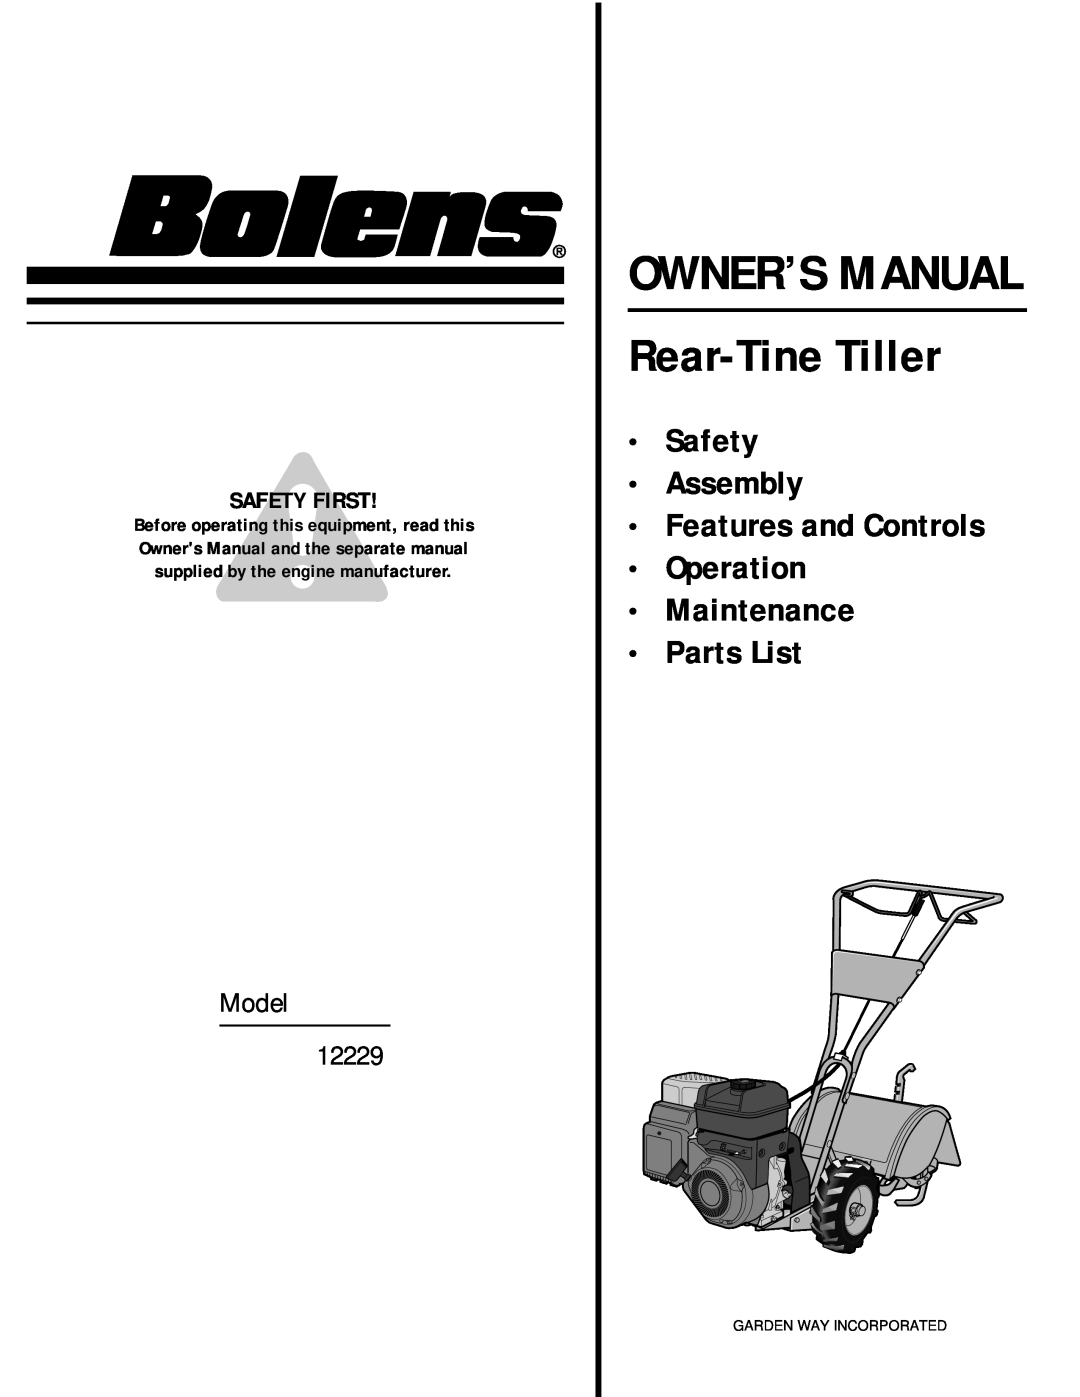 Bolens 12229 owner manual Safety First, Rear-Tine Tiller, Safety Assembly Features and Controls Operation Maintenance 